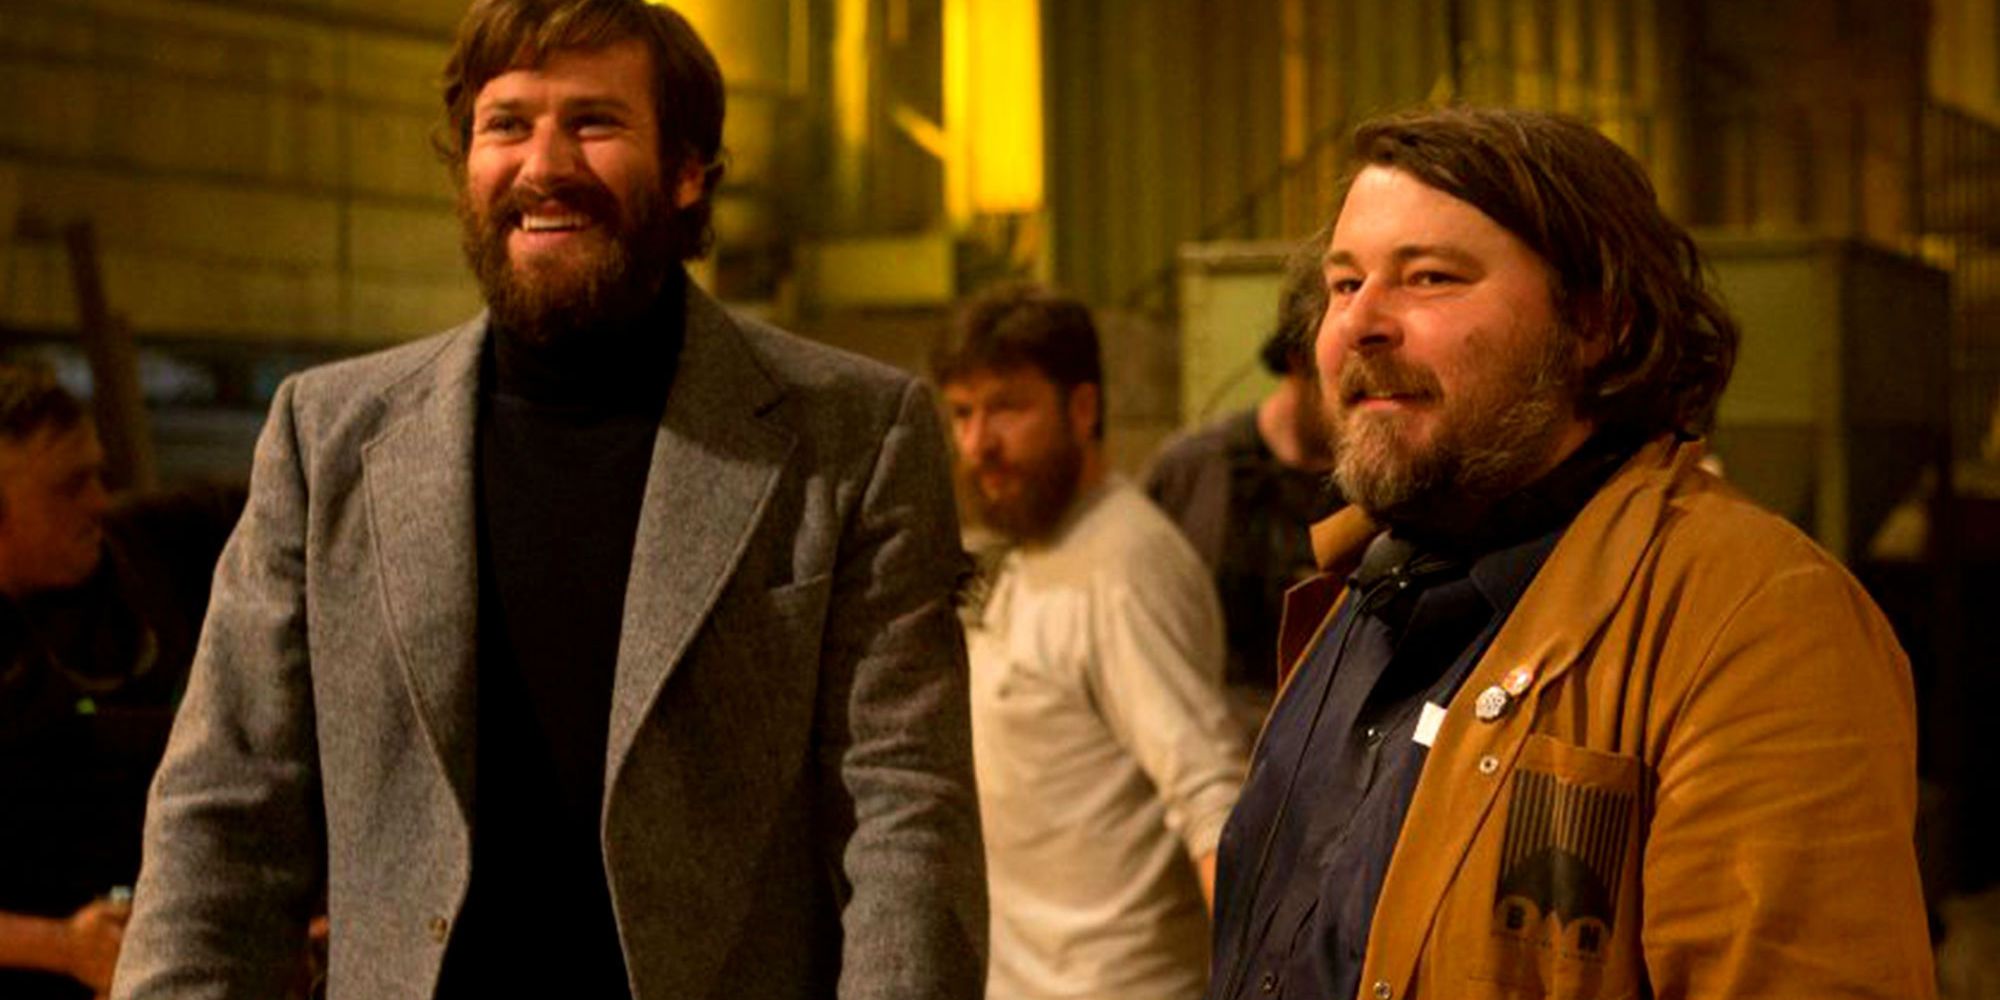 Ben Wheatley and Armie Hammer on the set of Free Fire